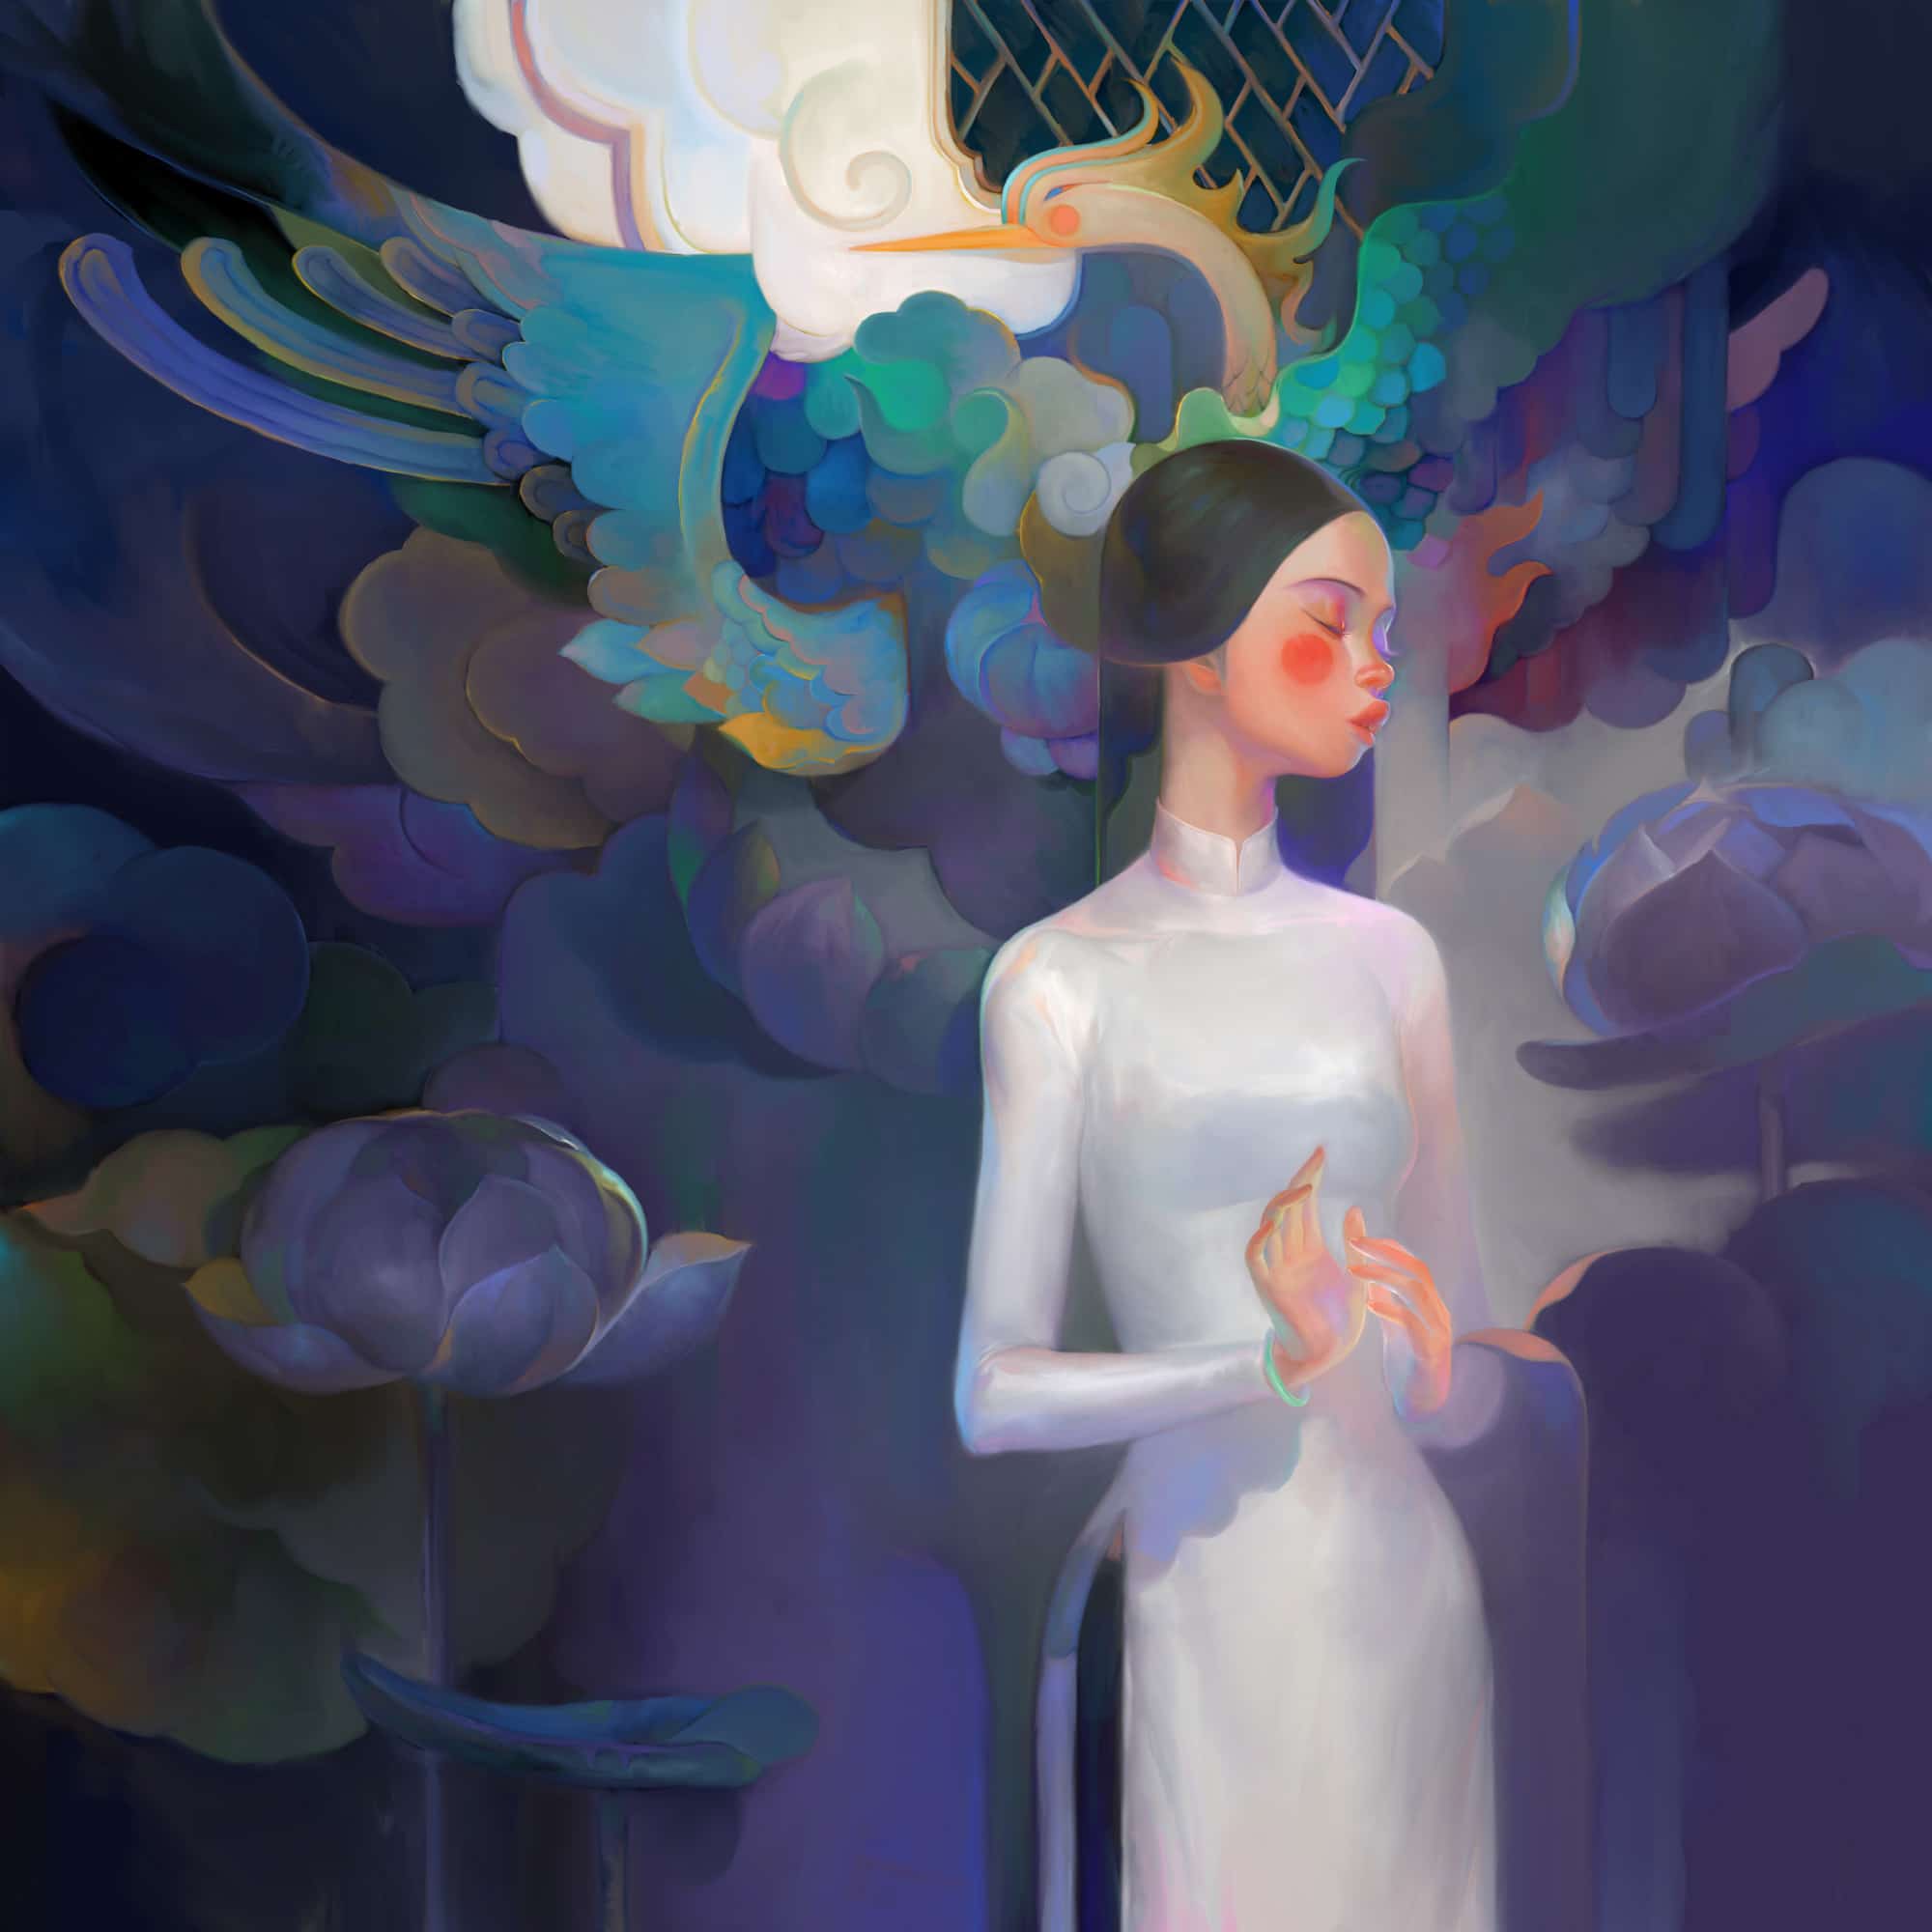 Digital Illustrations of Women by Thanh Nhan Nguyen